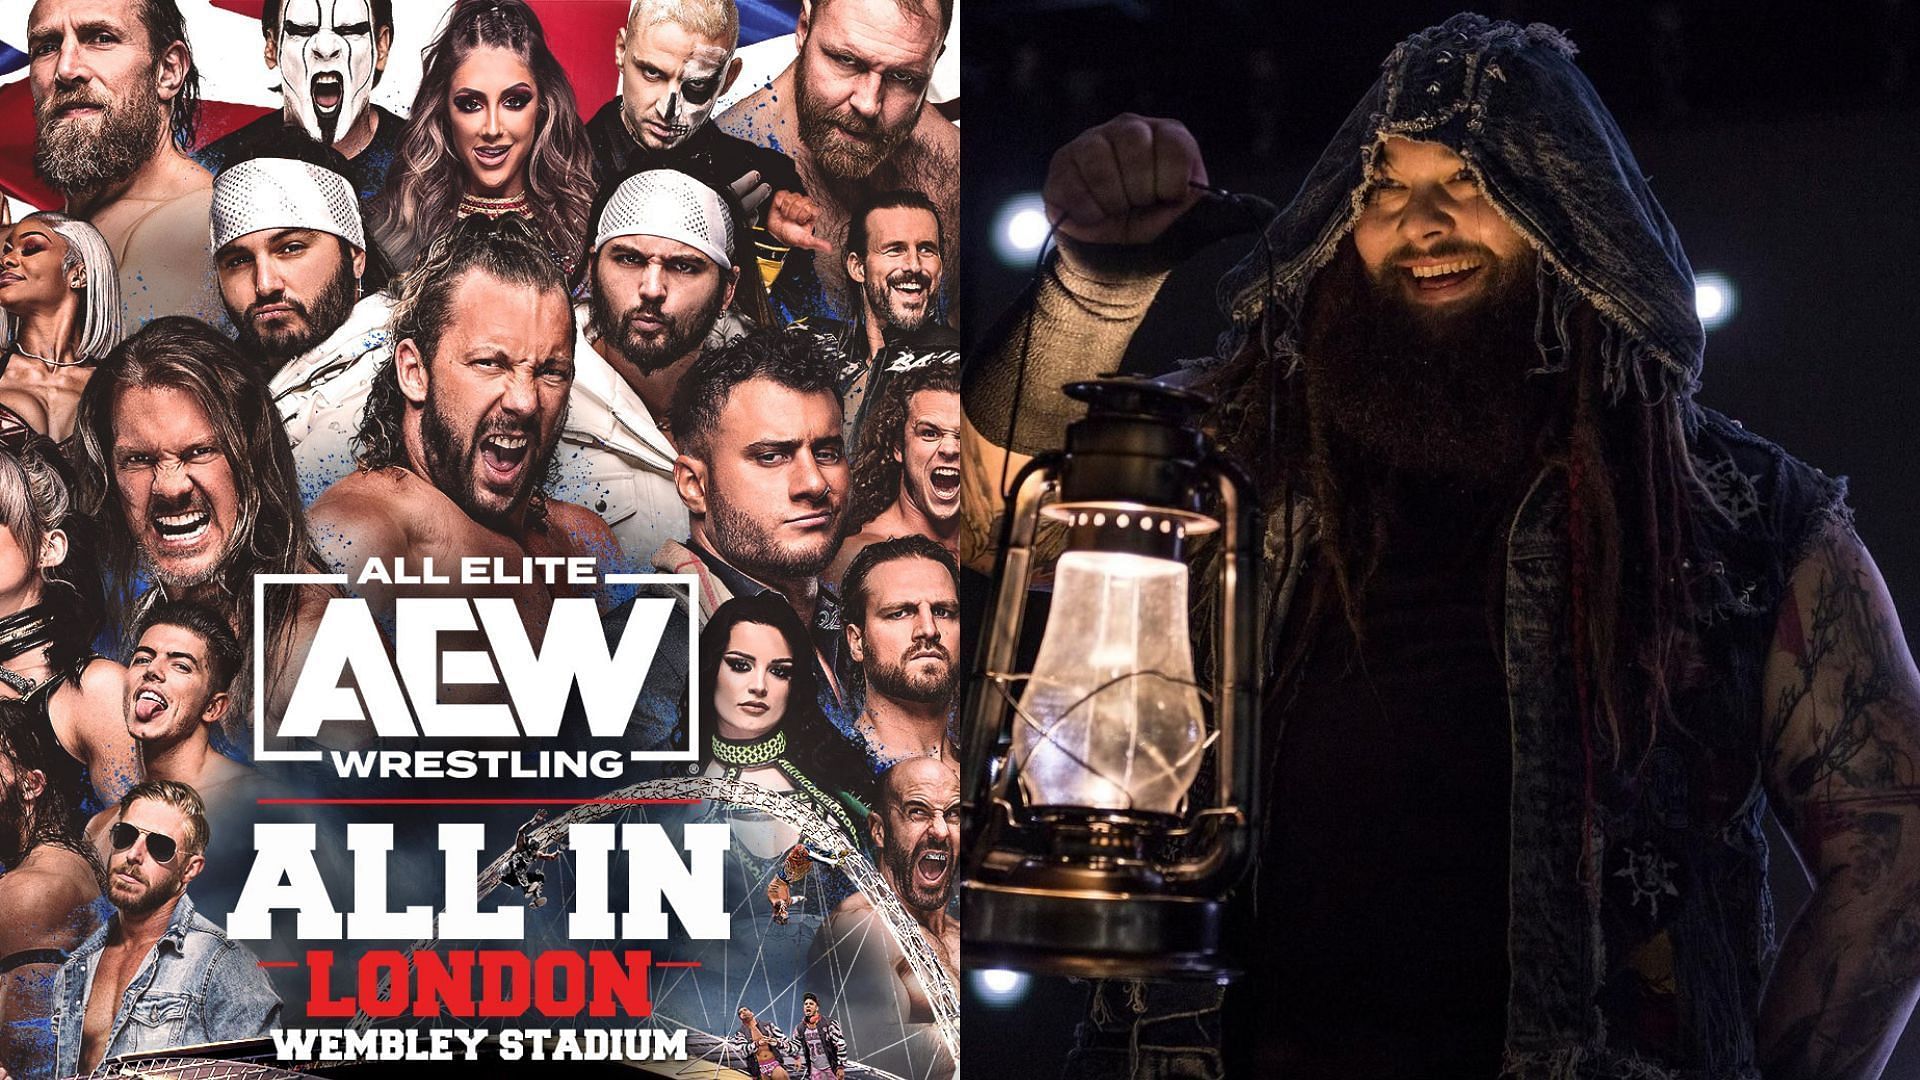 AEW All In aired live today in London. 